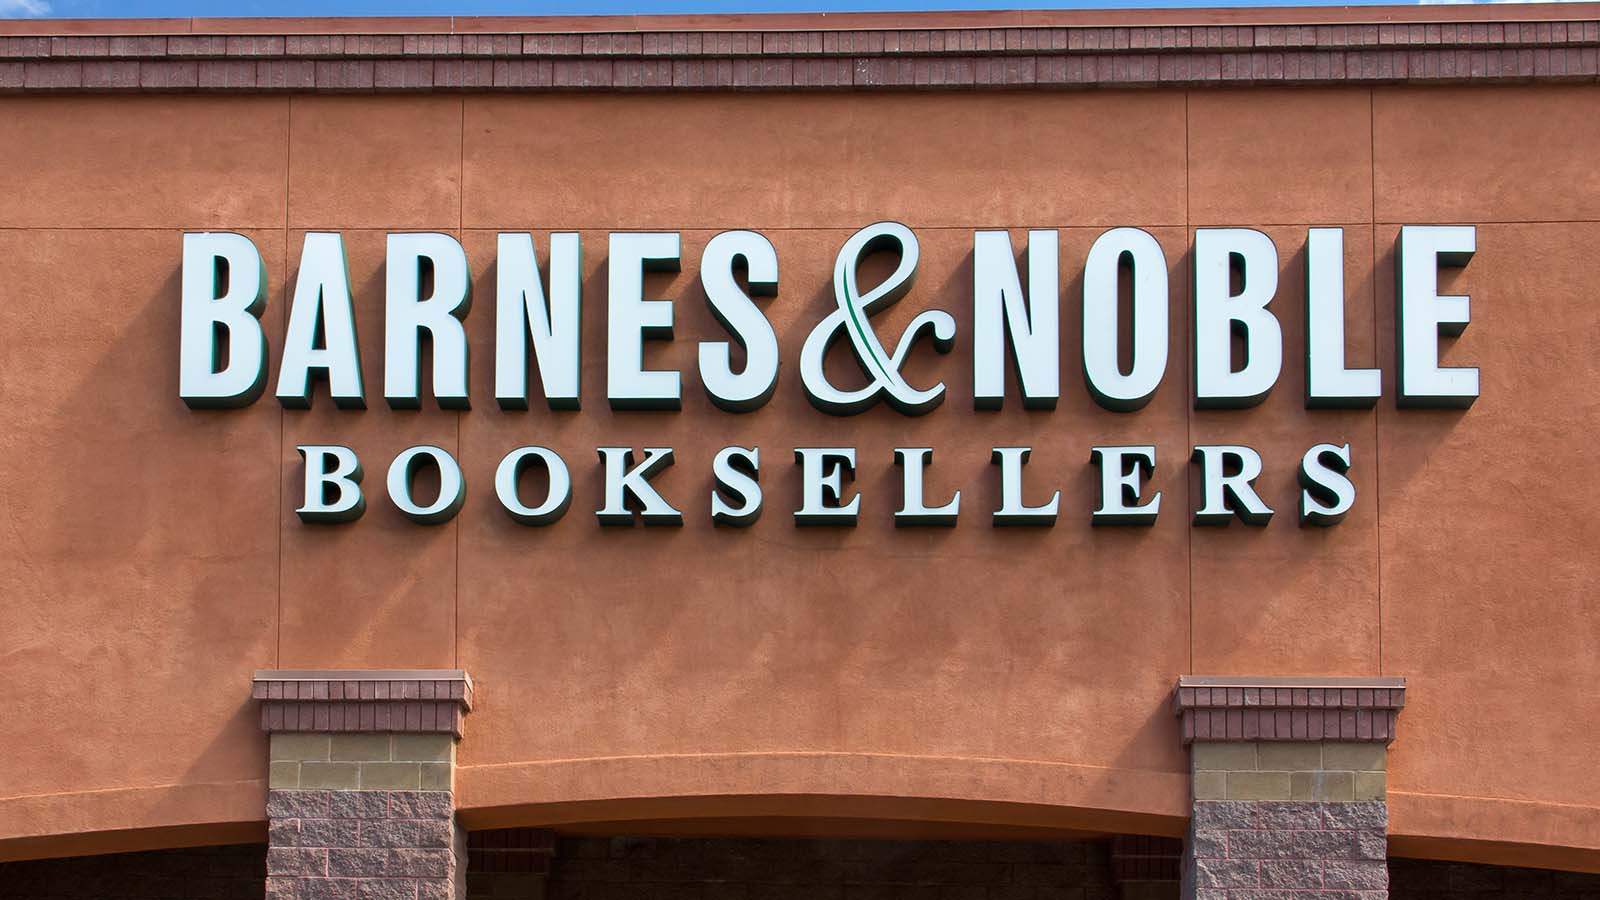 Why Is Barnes & Noble (BNED) Stock Down 16% Today?